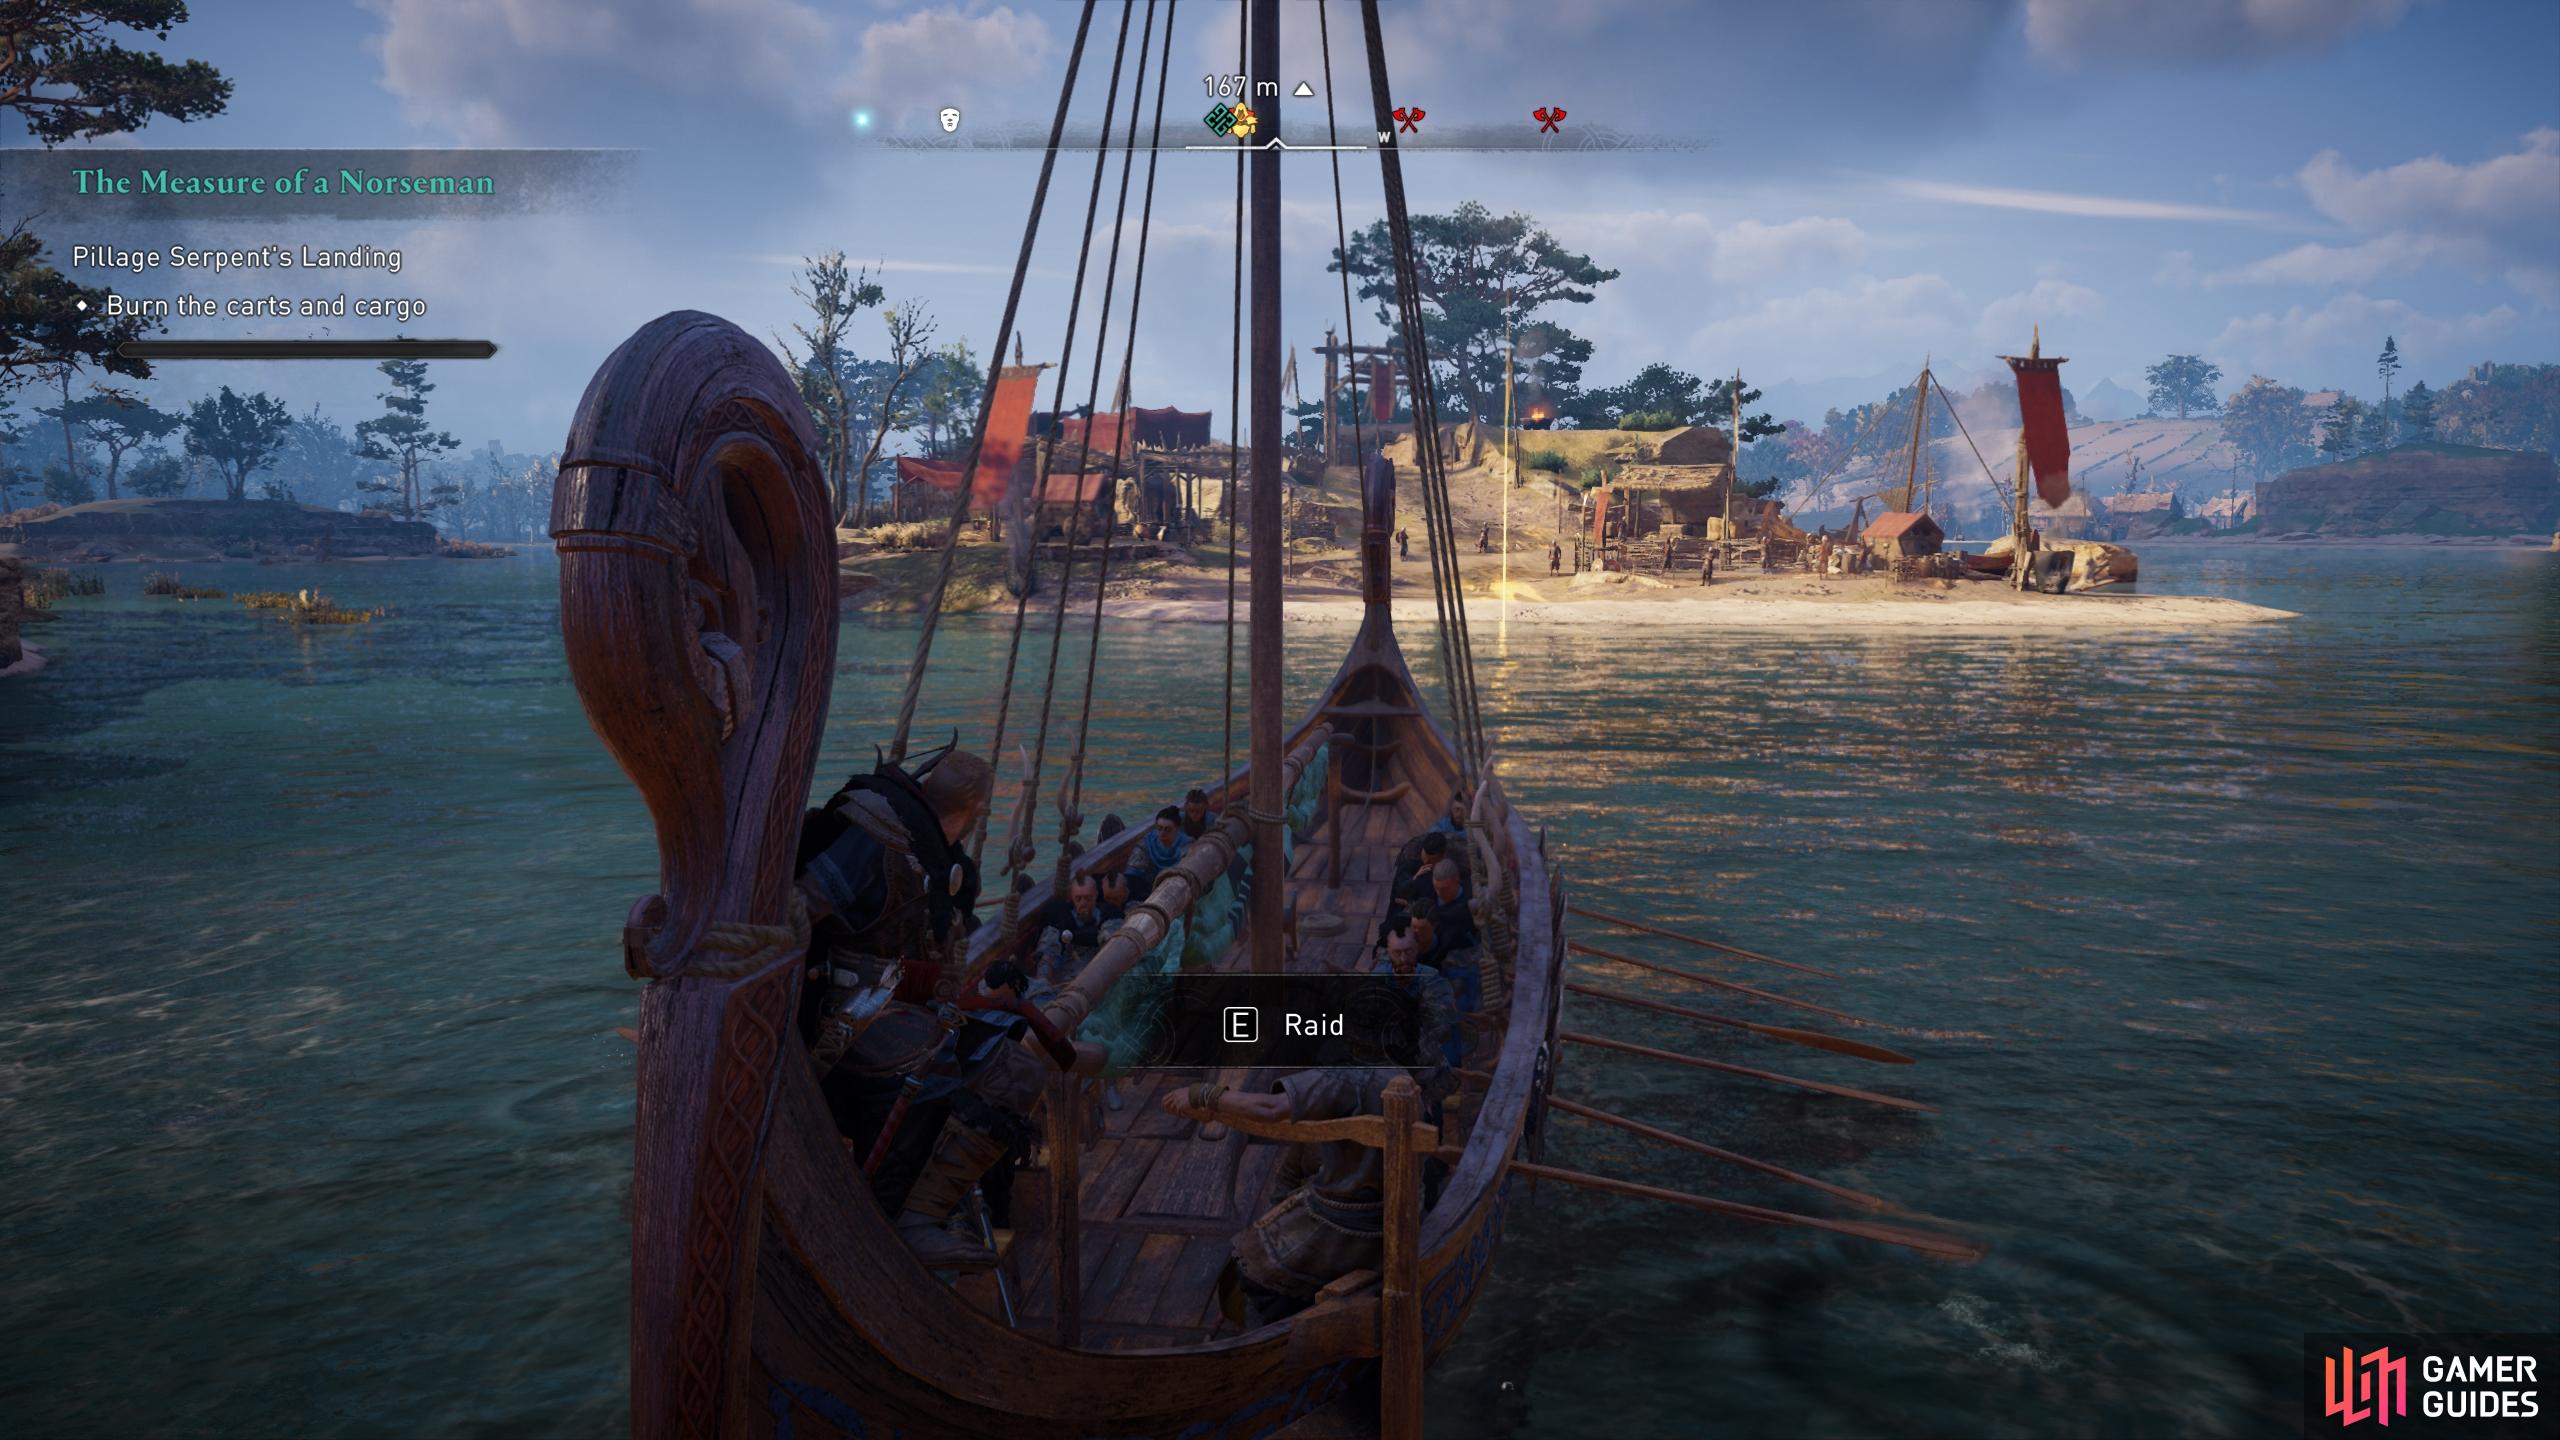 Raid the camp at Serpent's Landing from your longship with your warriors.